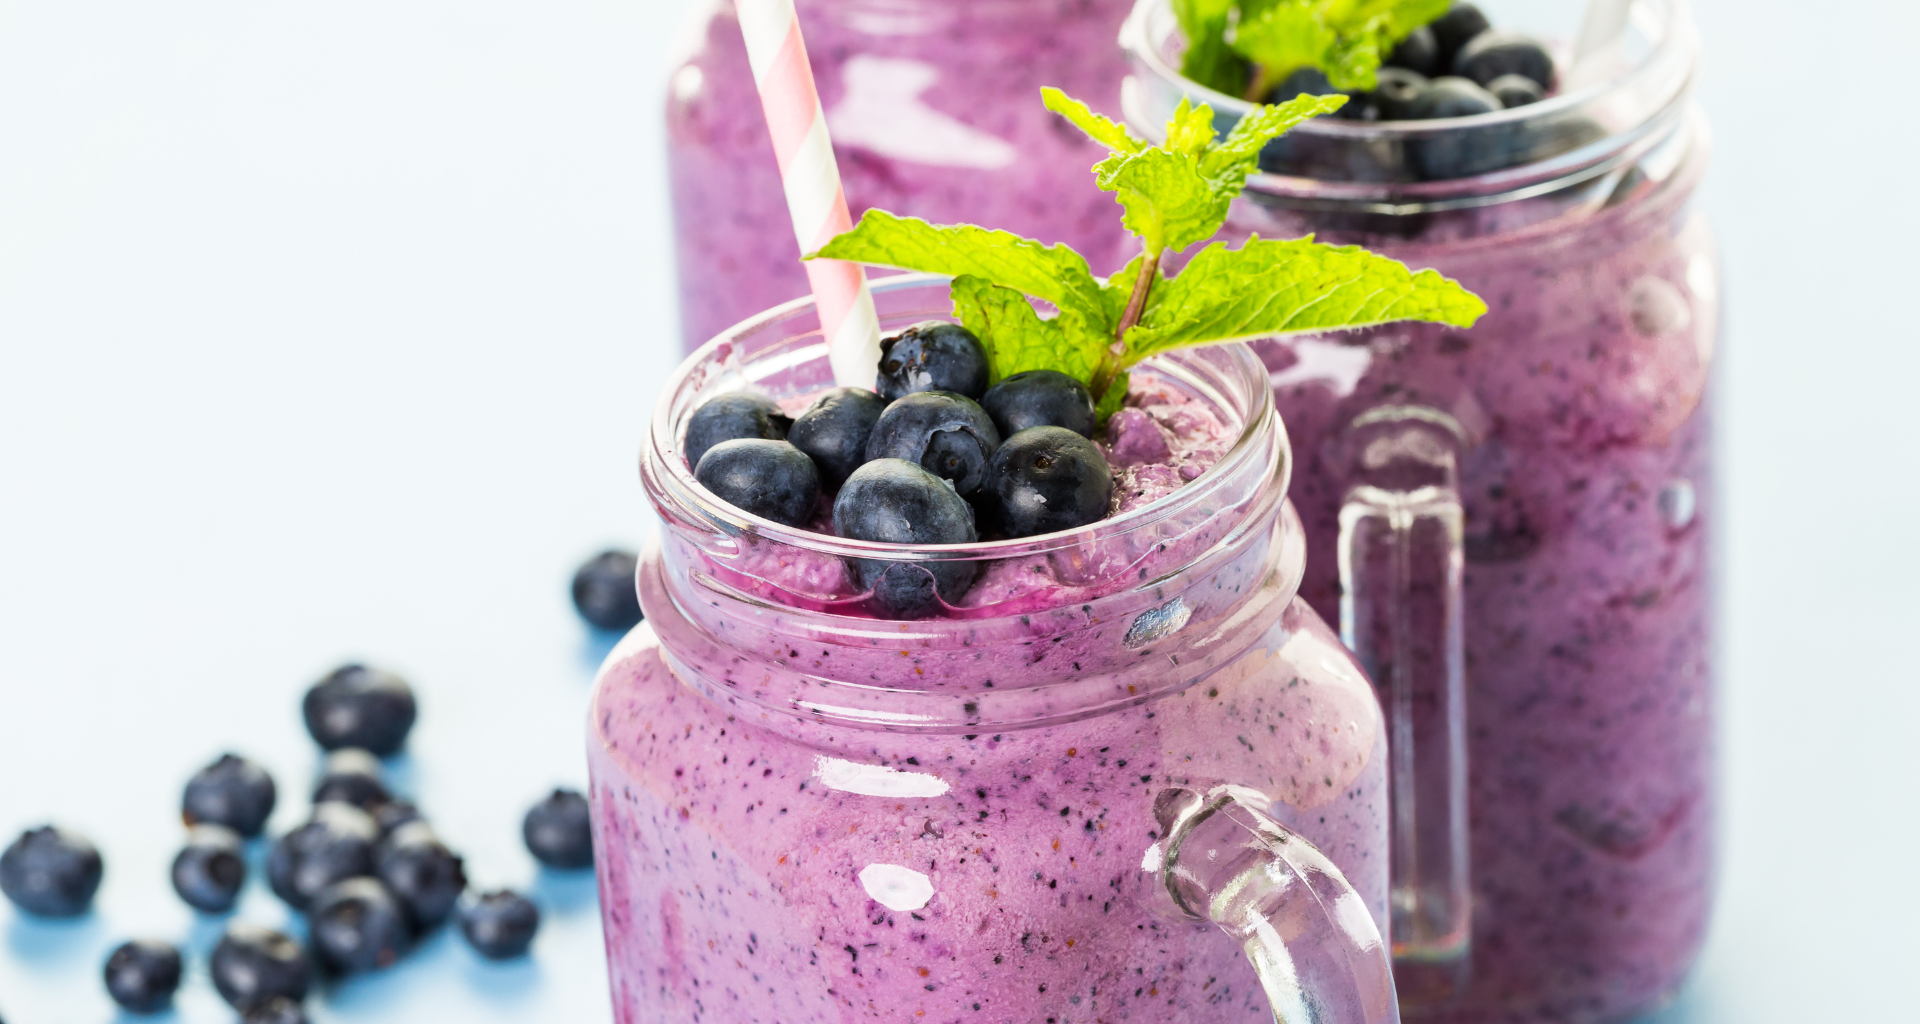 A delicious looking blueberry collagen smoothie in a tall glass.